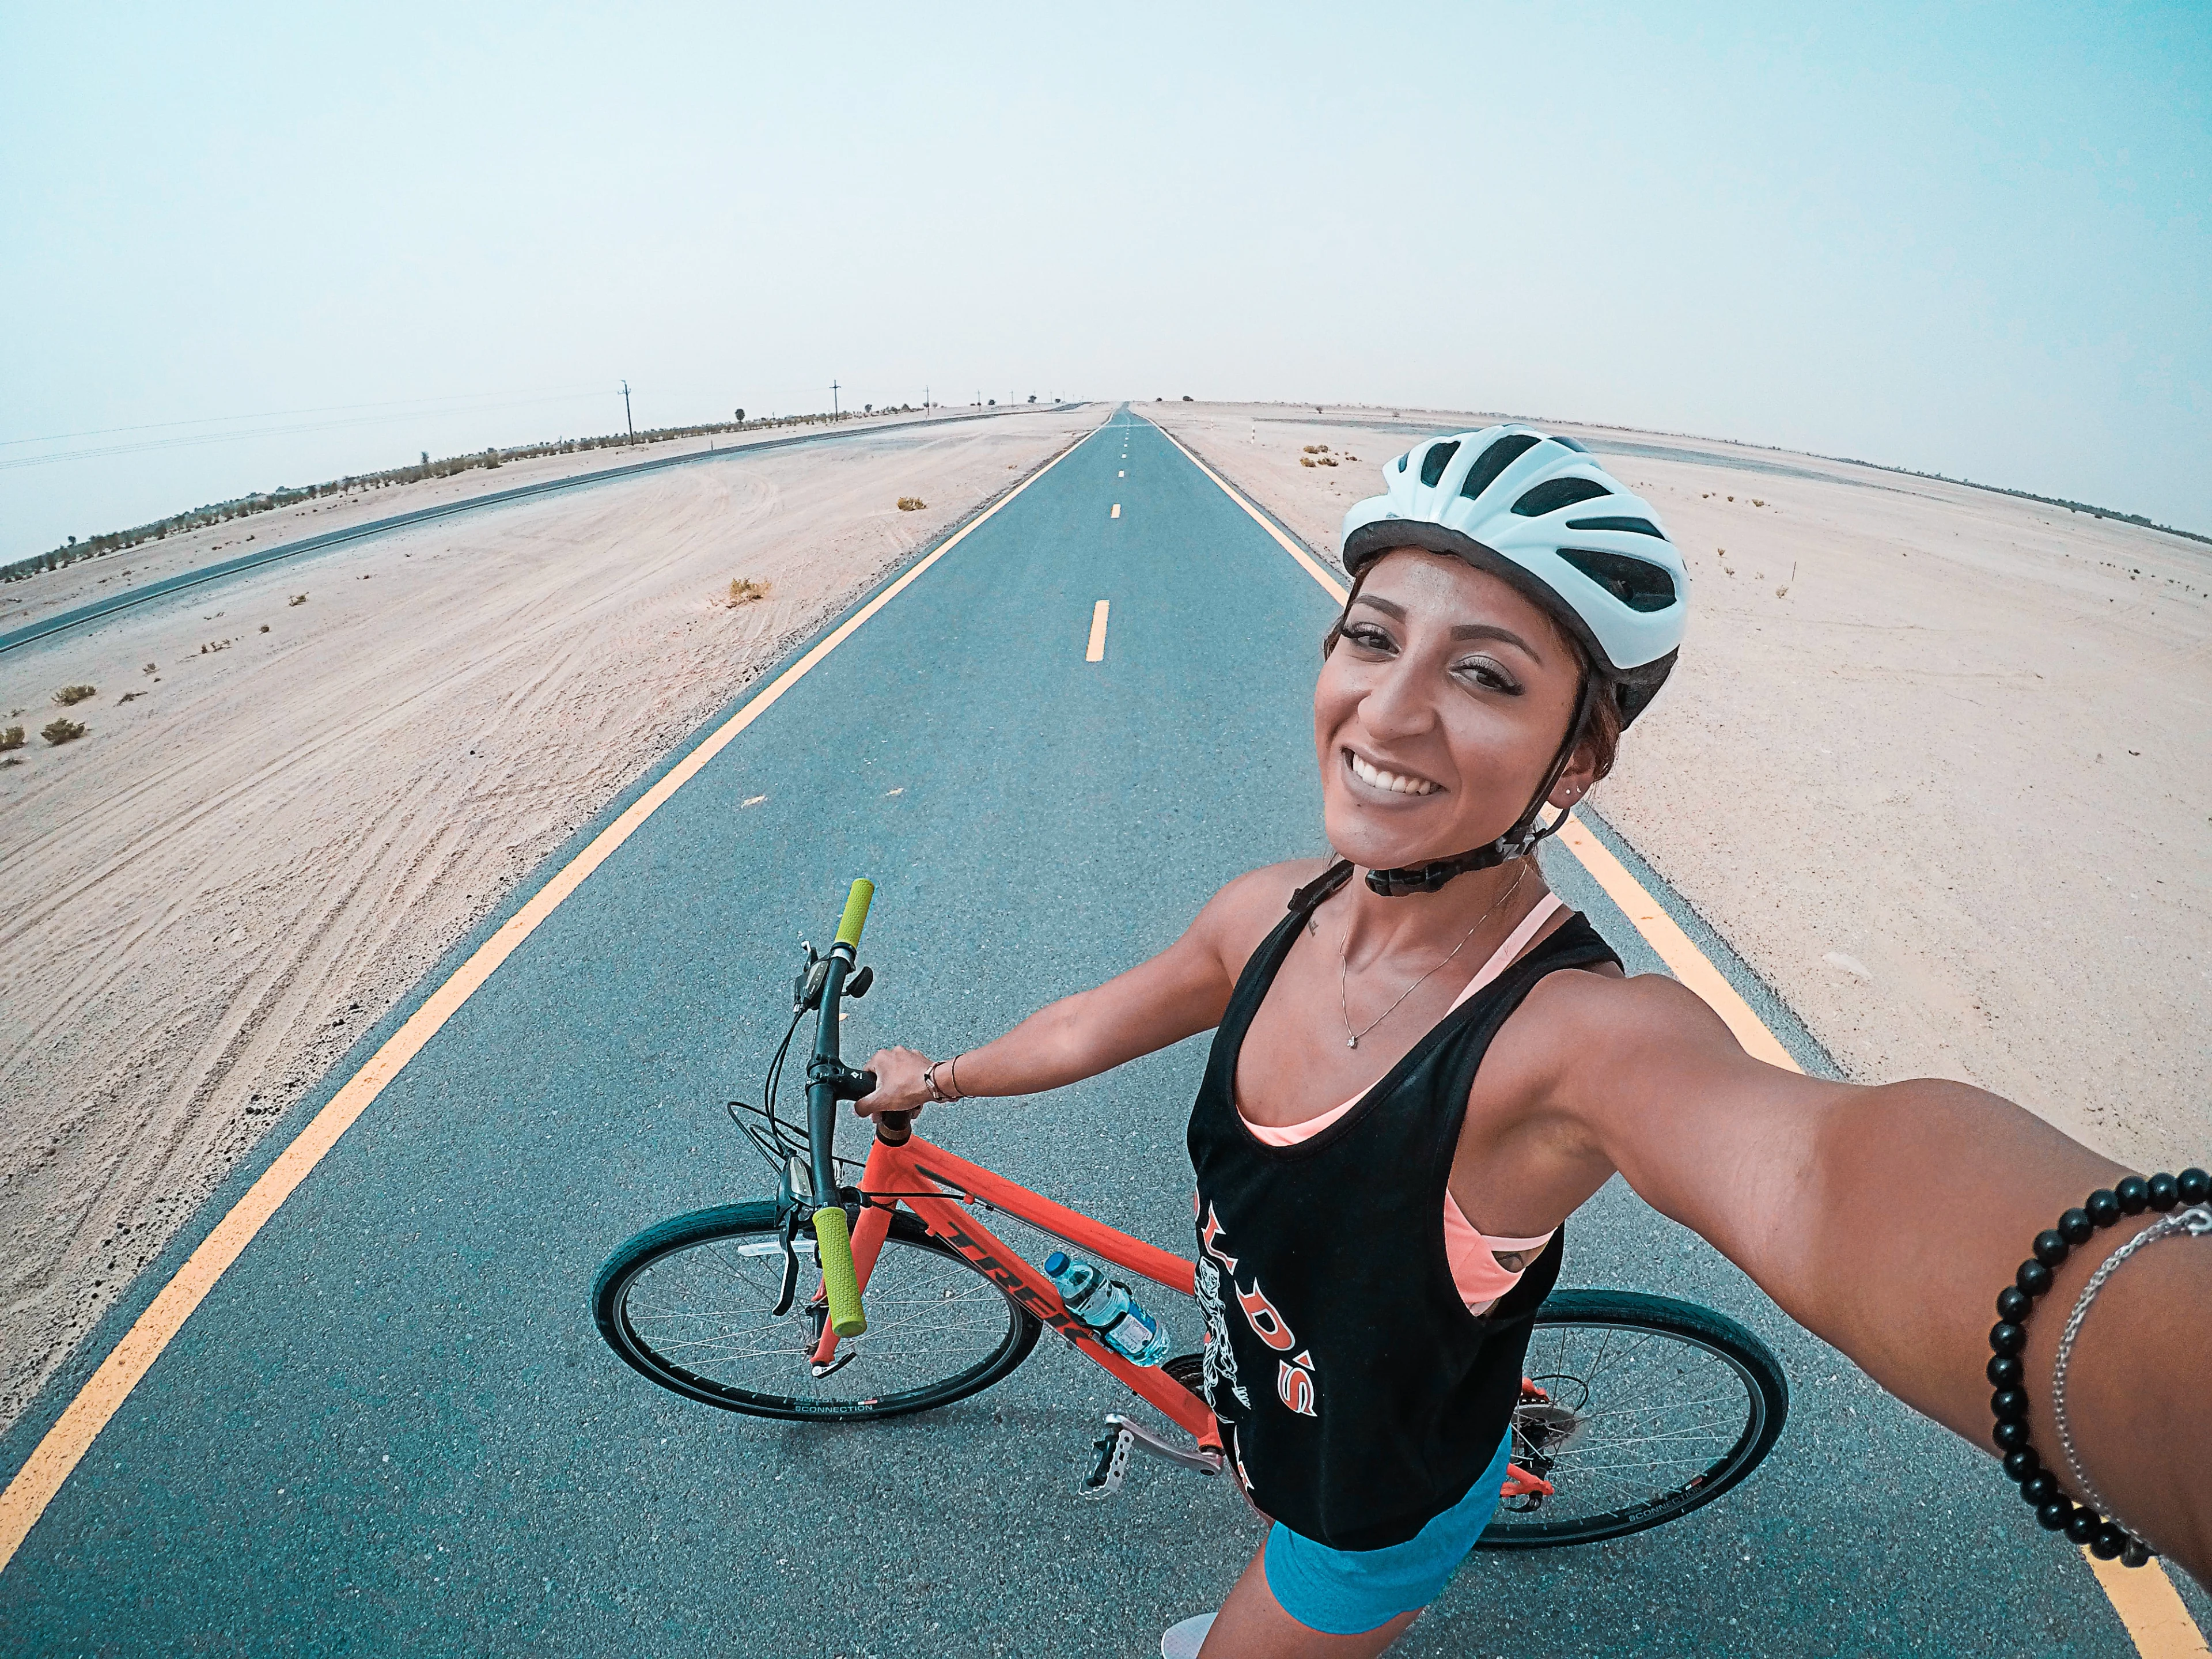 Bike rider takes selfie in the middle of the road